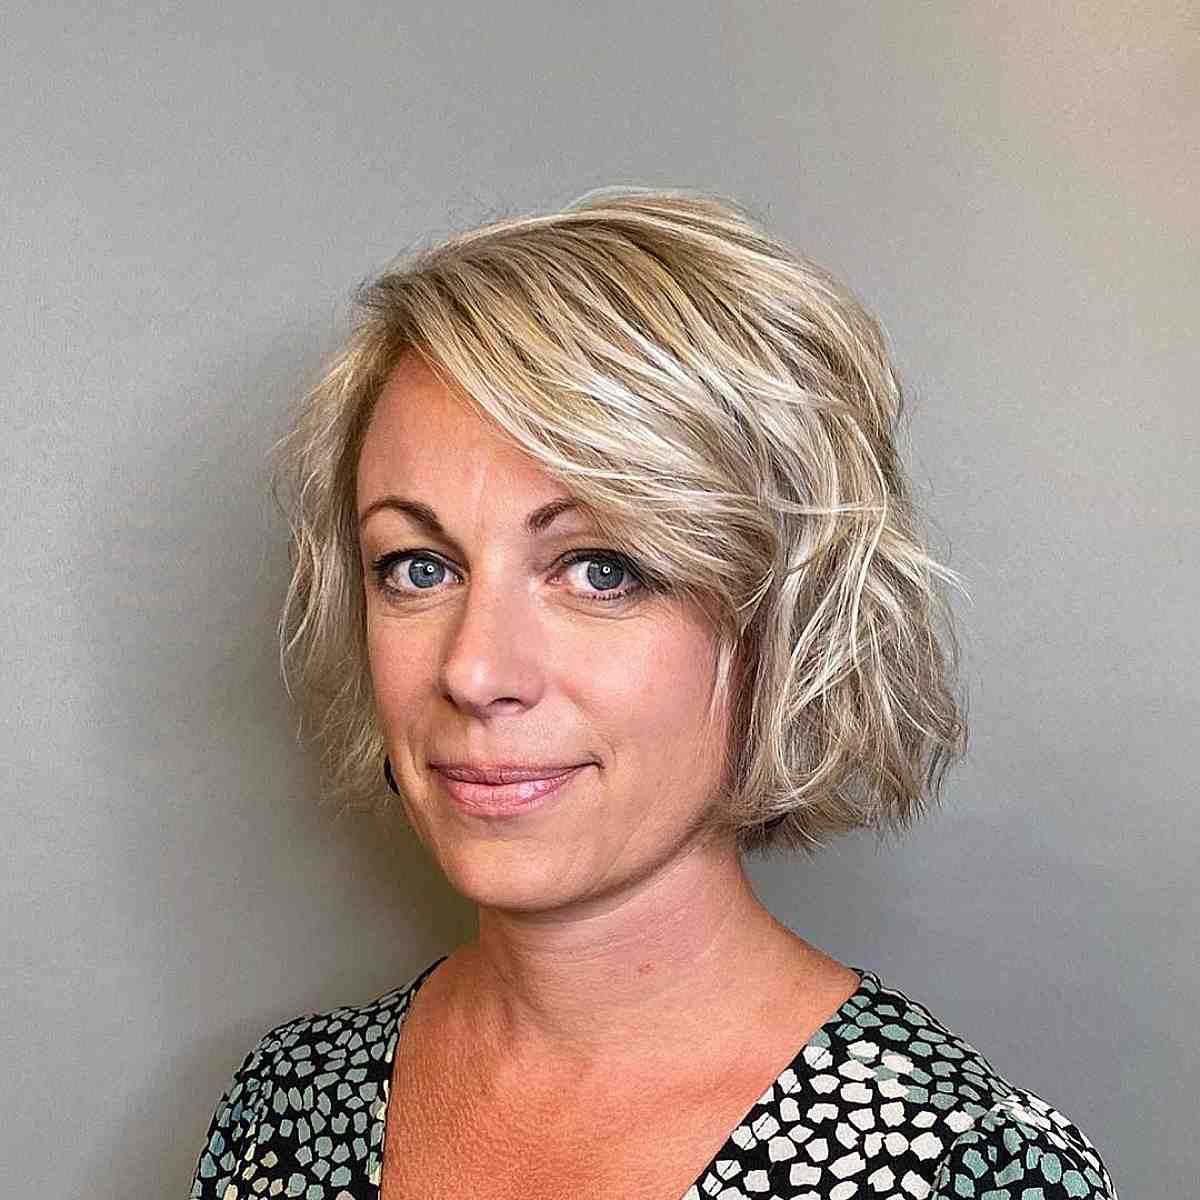 Blonde Textured Bob with Side Bangs